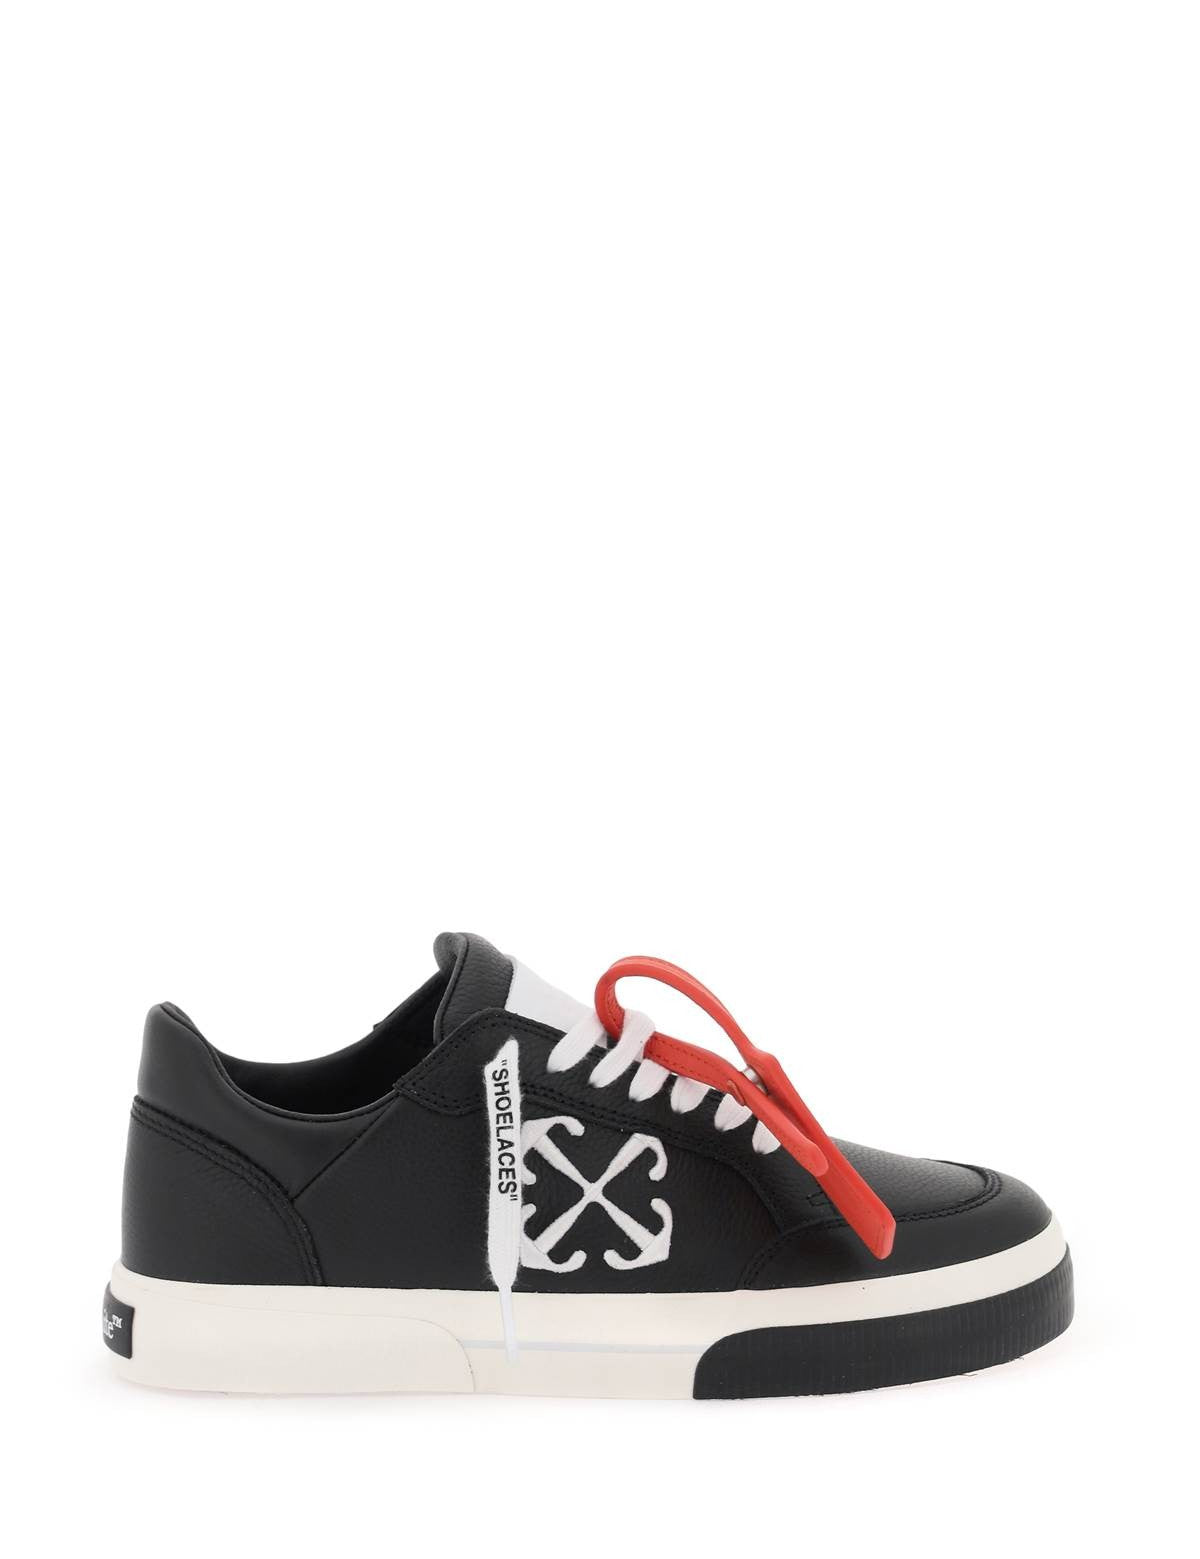 off-white-low-leather-vulcanized-sneakers-for.jpg